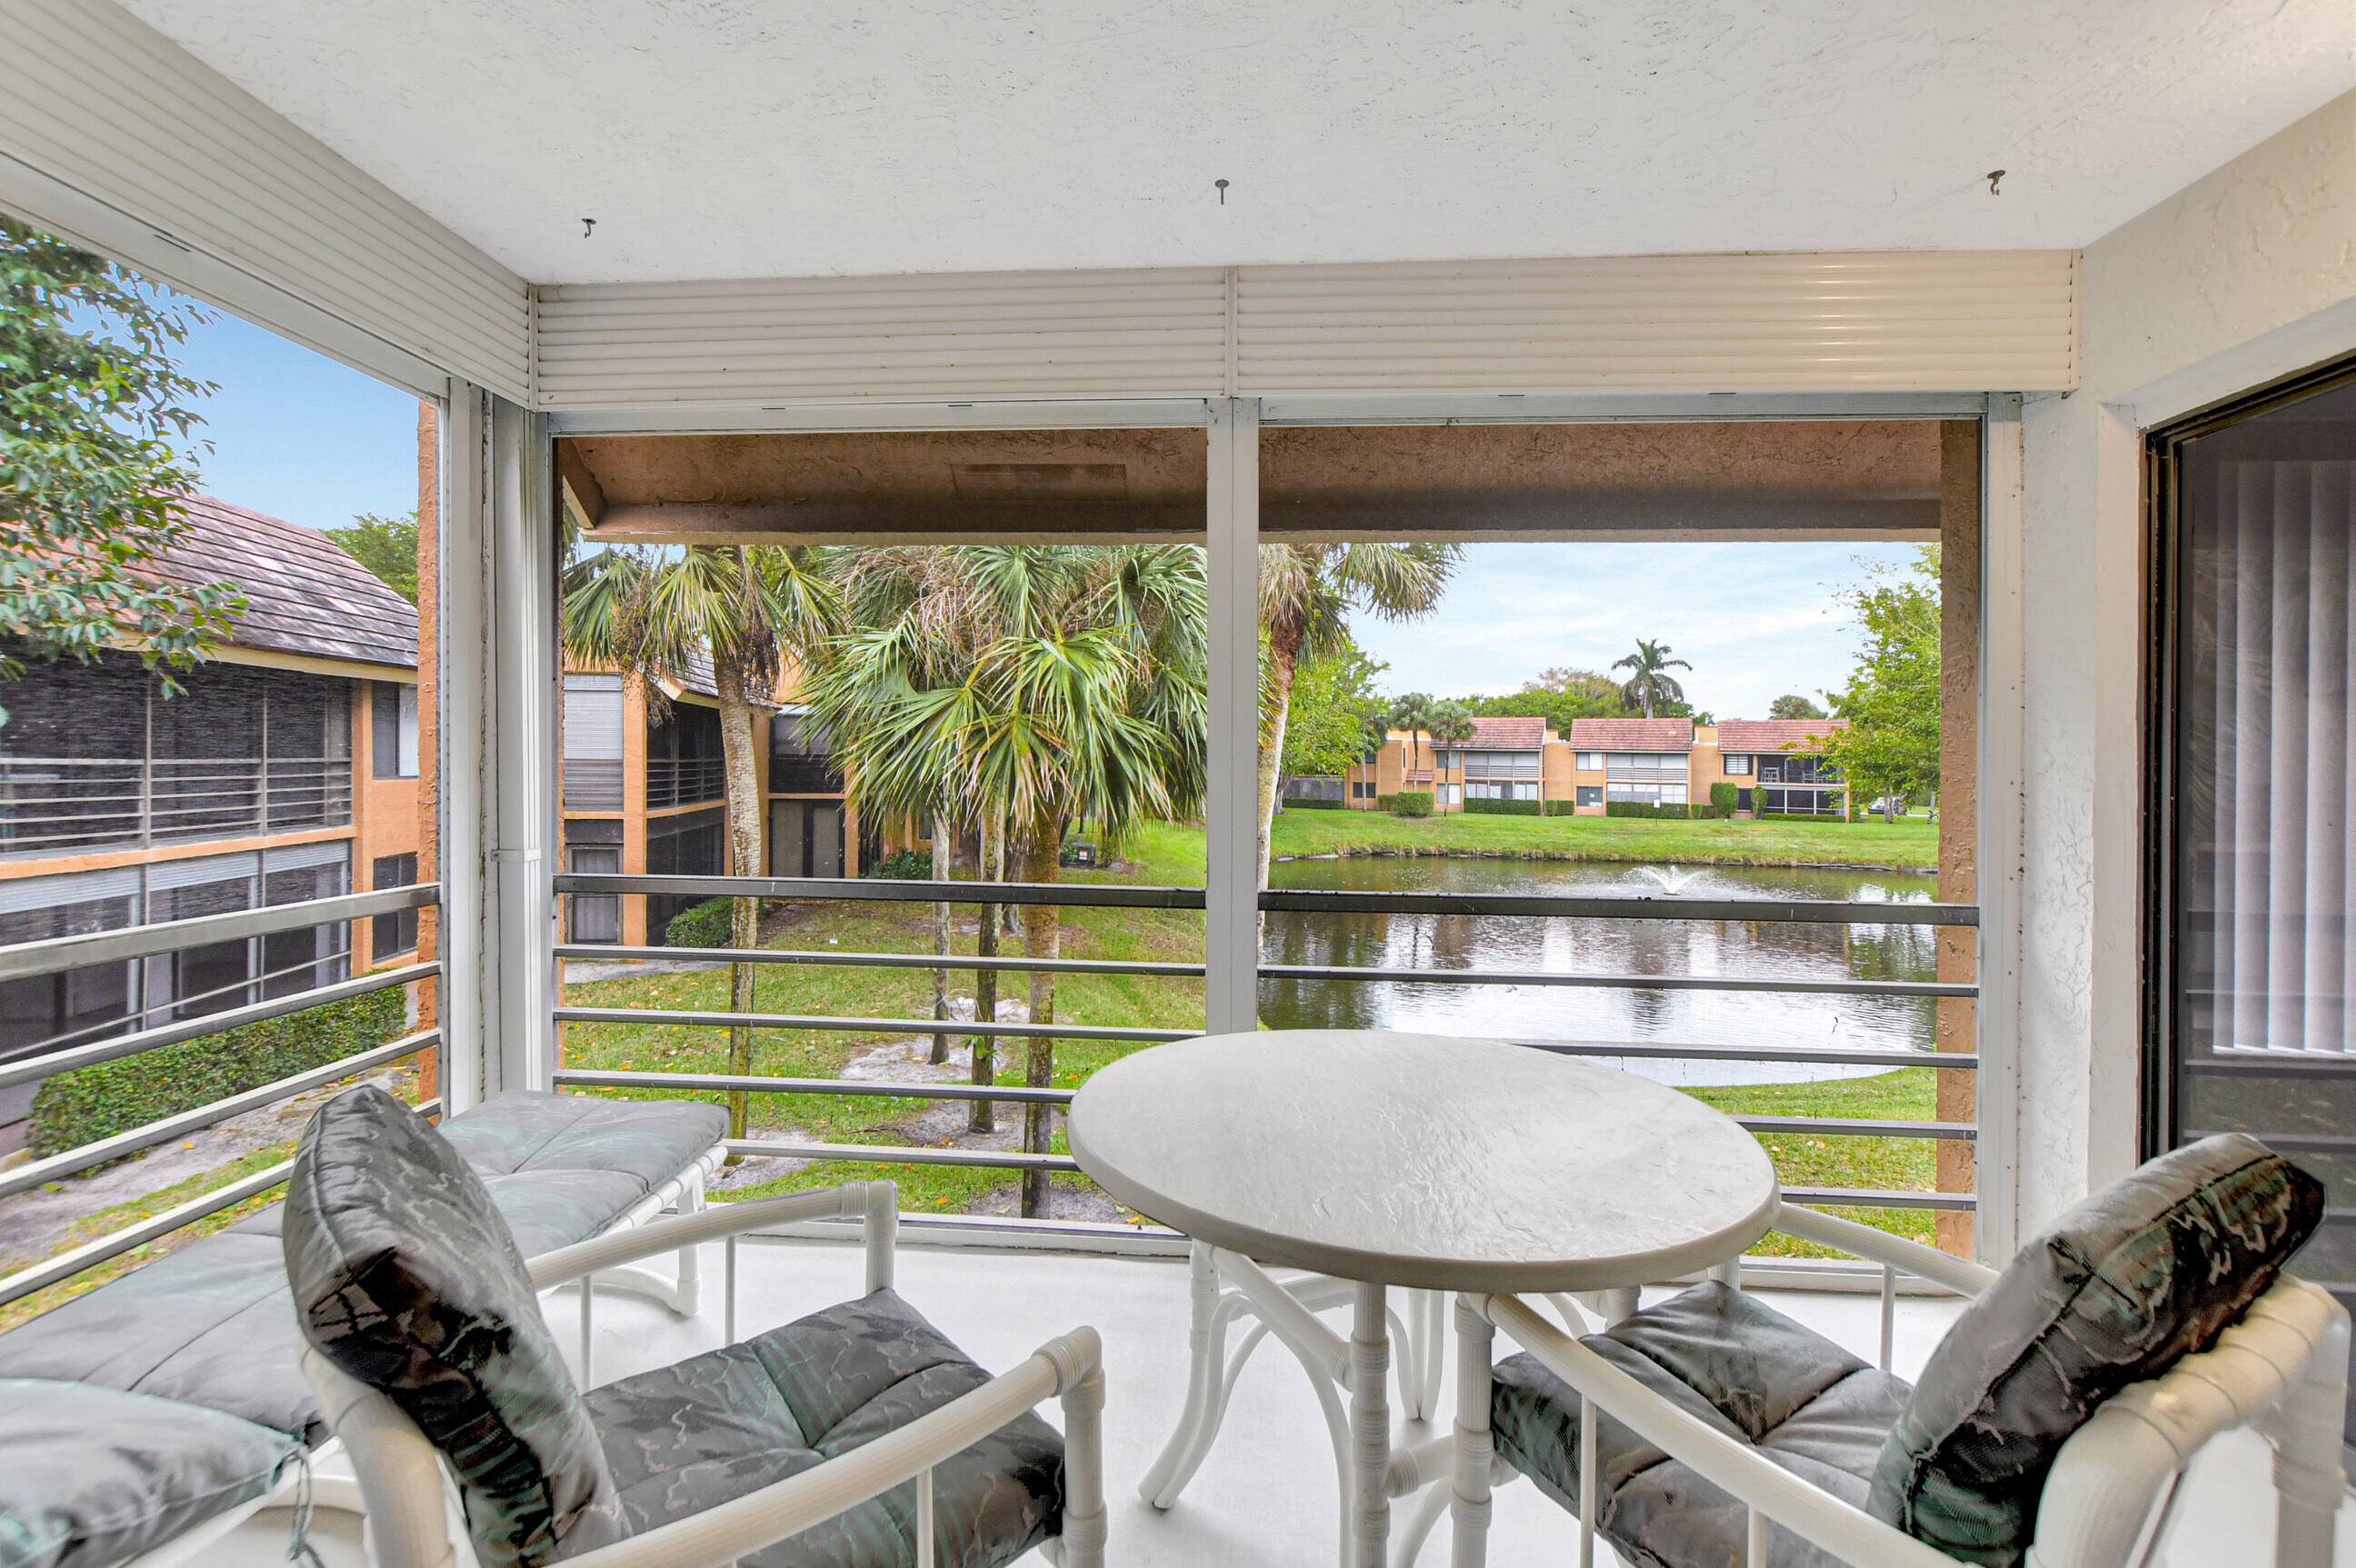 Beautiful converted 2 bedroom, 2 bath condo with lake views from your private screened in lanai !